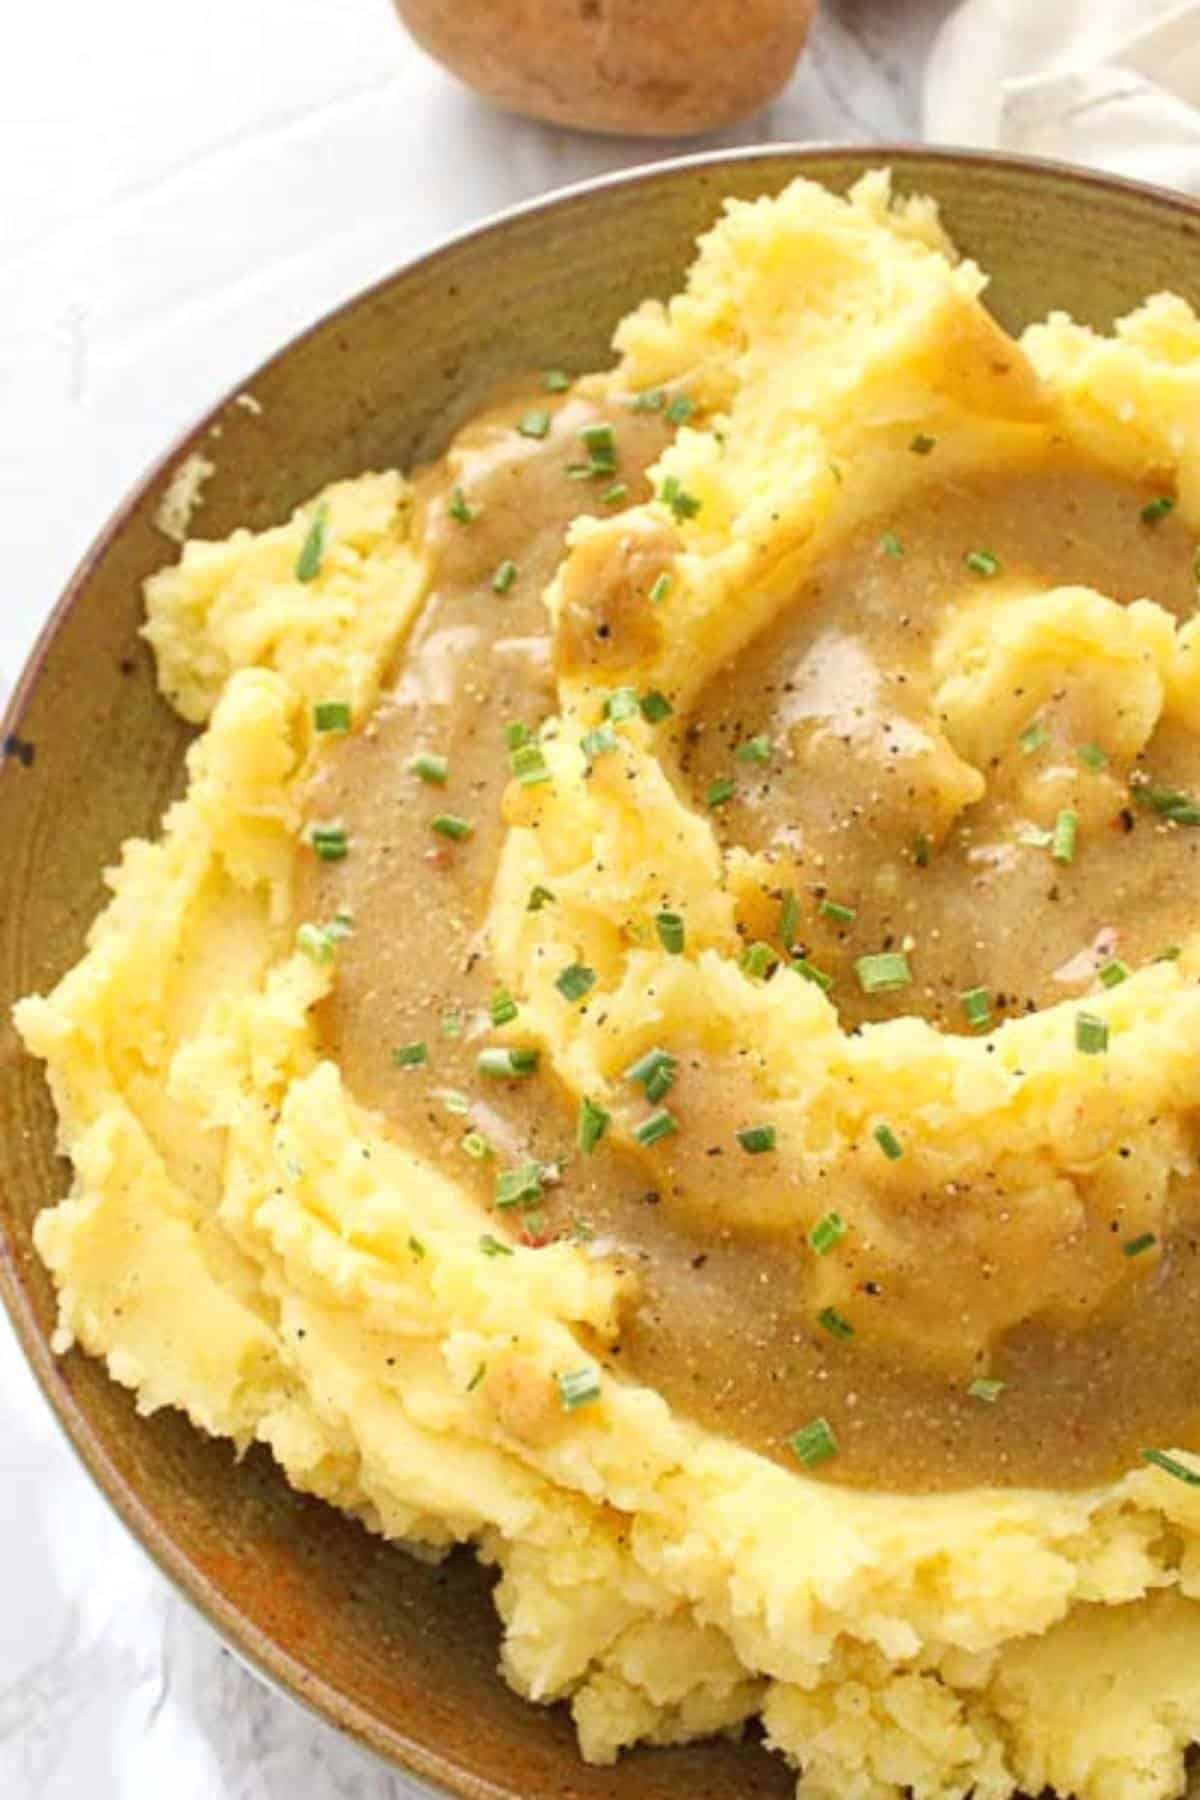 Big serving bowl of mashed potatoes drizzled with vegan brown gravy.